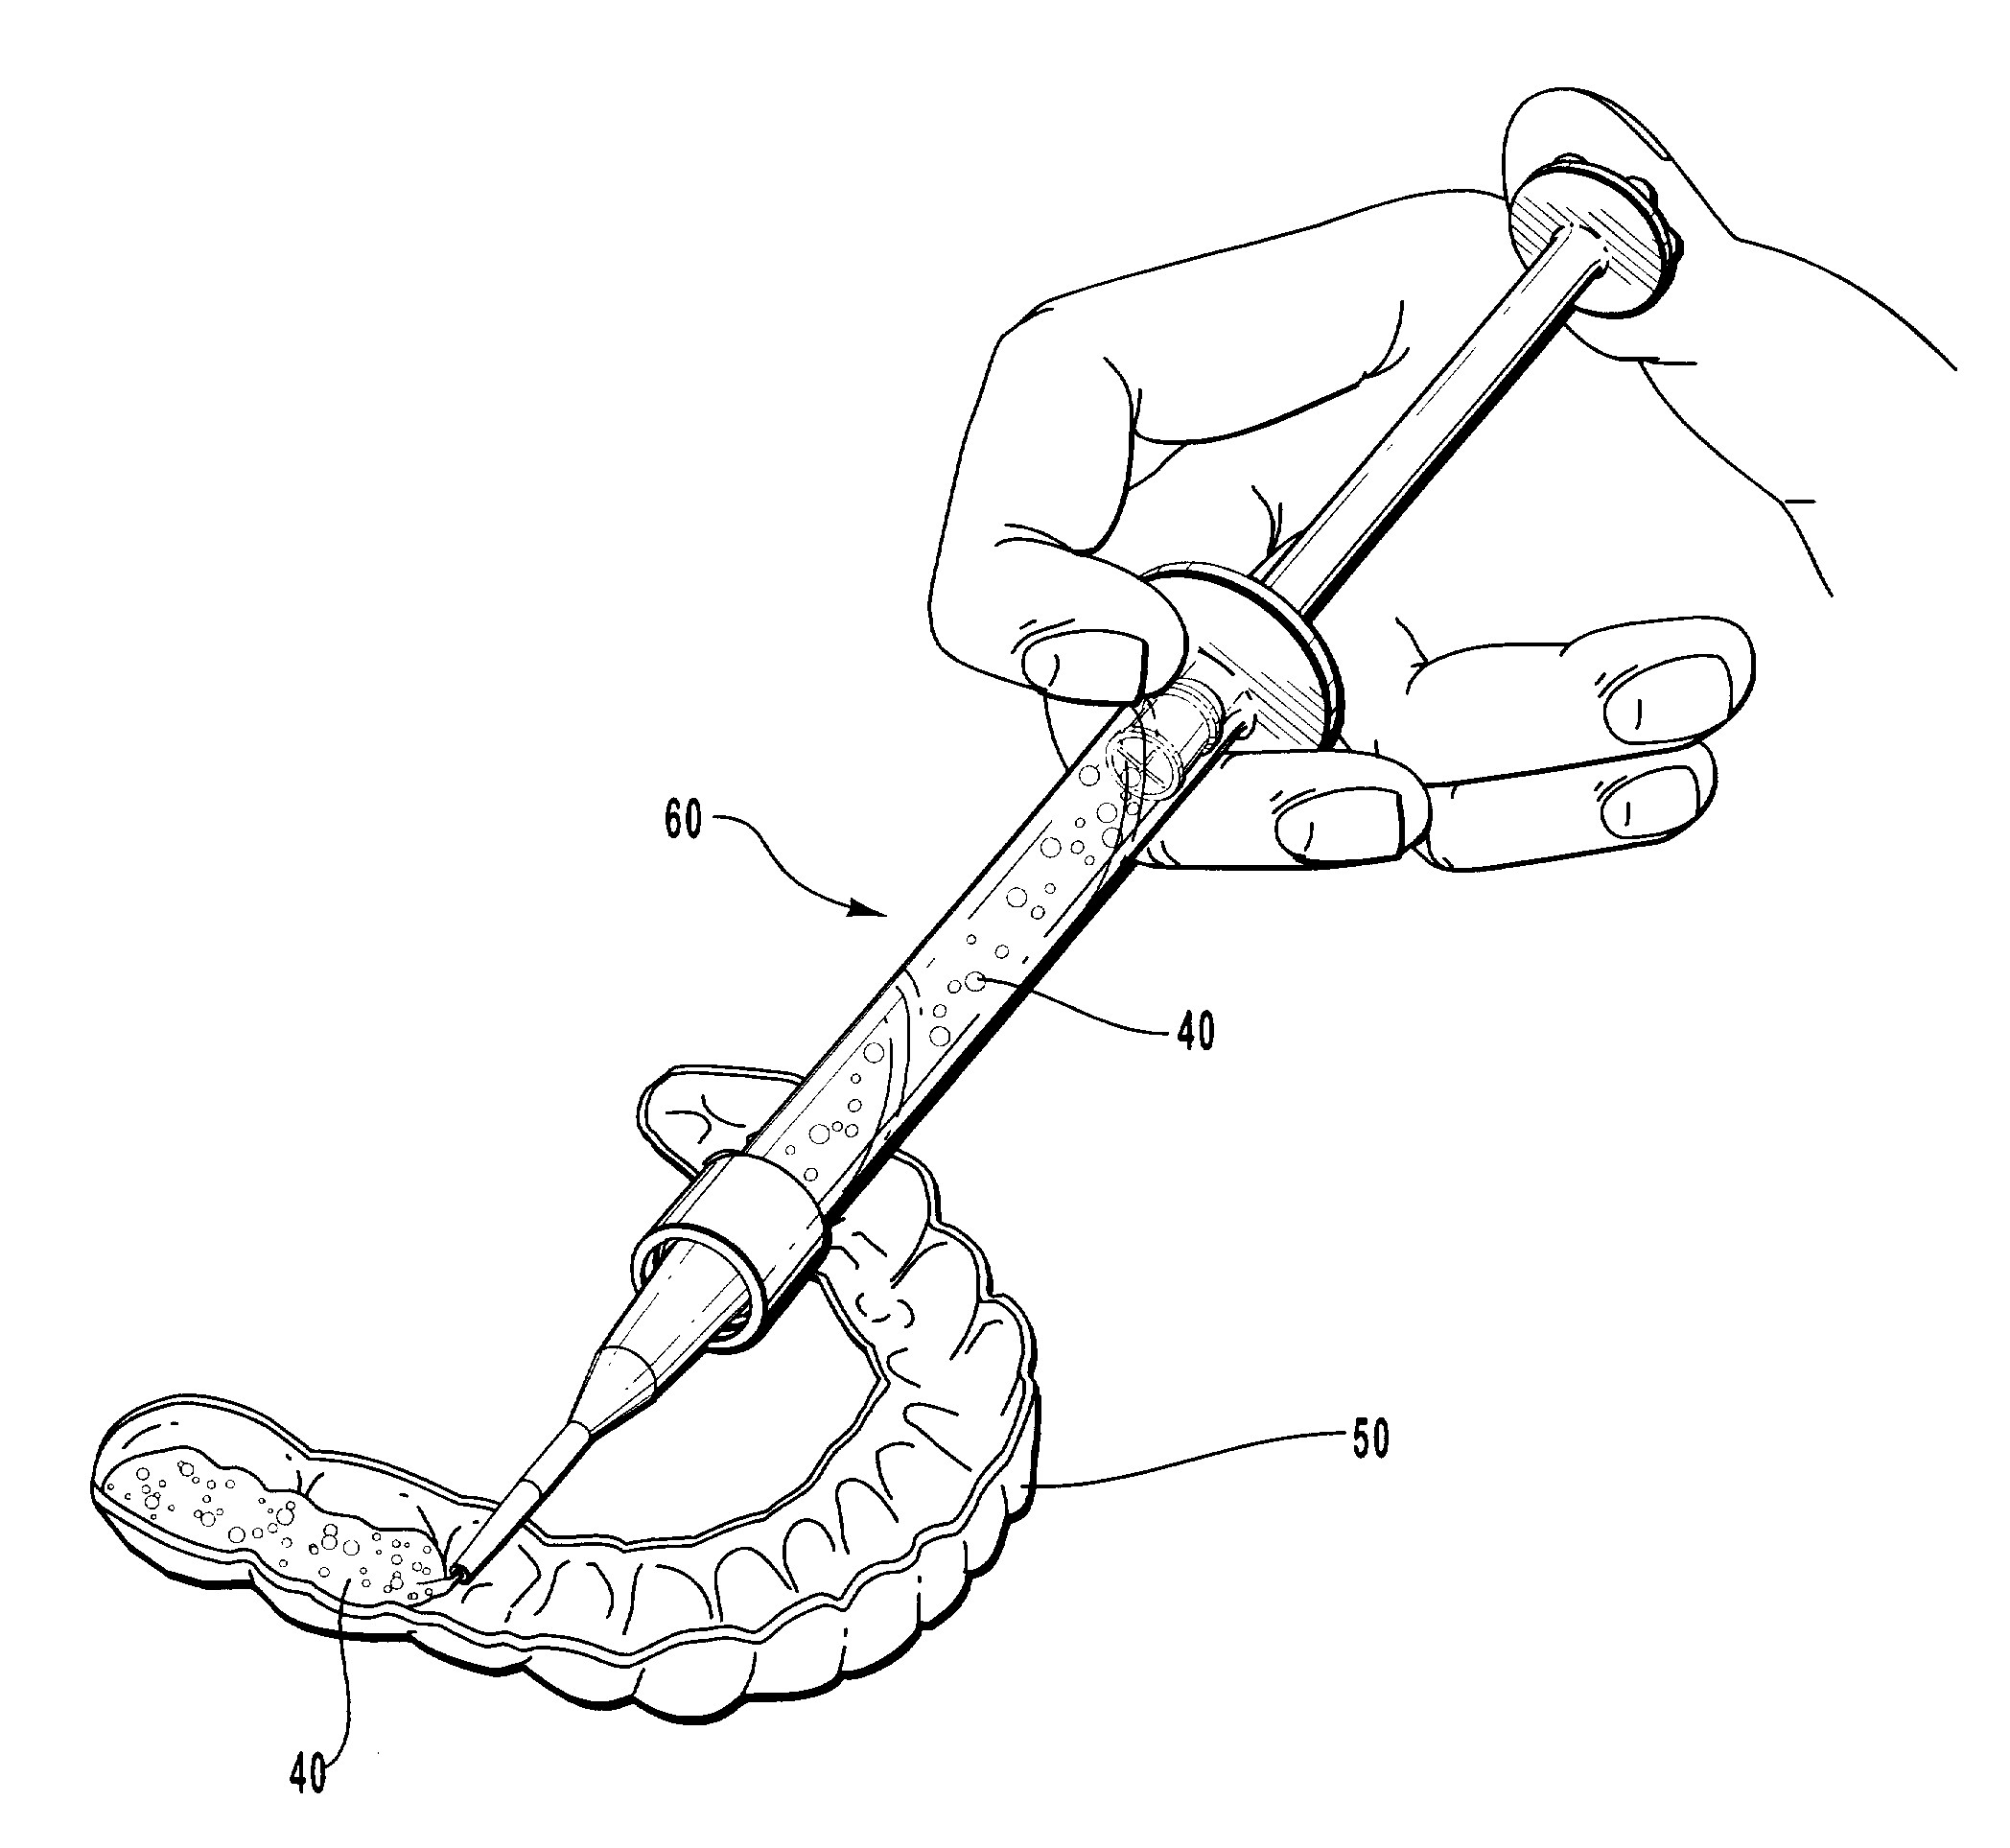 One-part dental compositions and methods for bleaching and desensitizing teeth